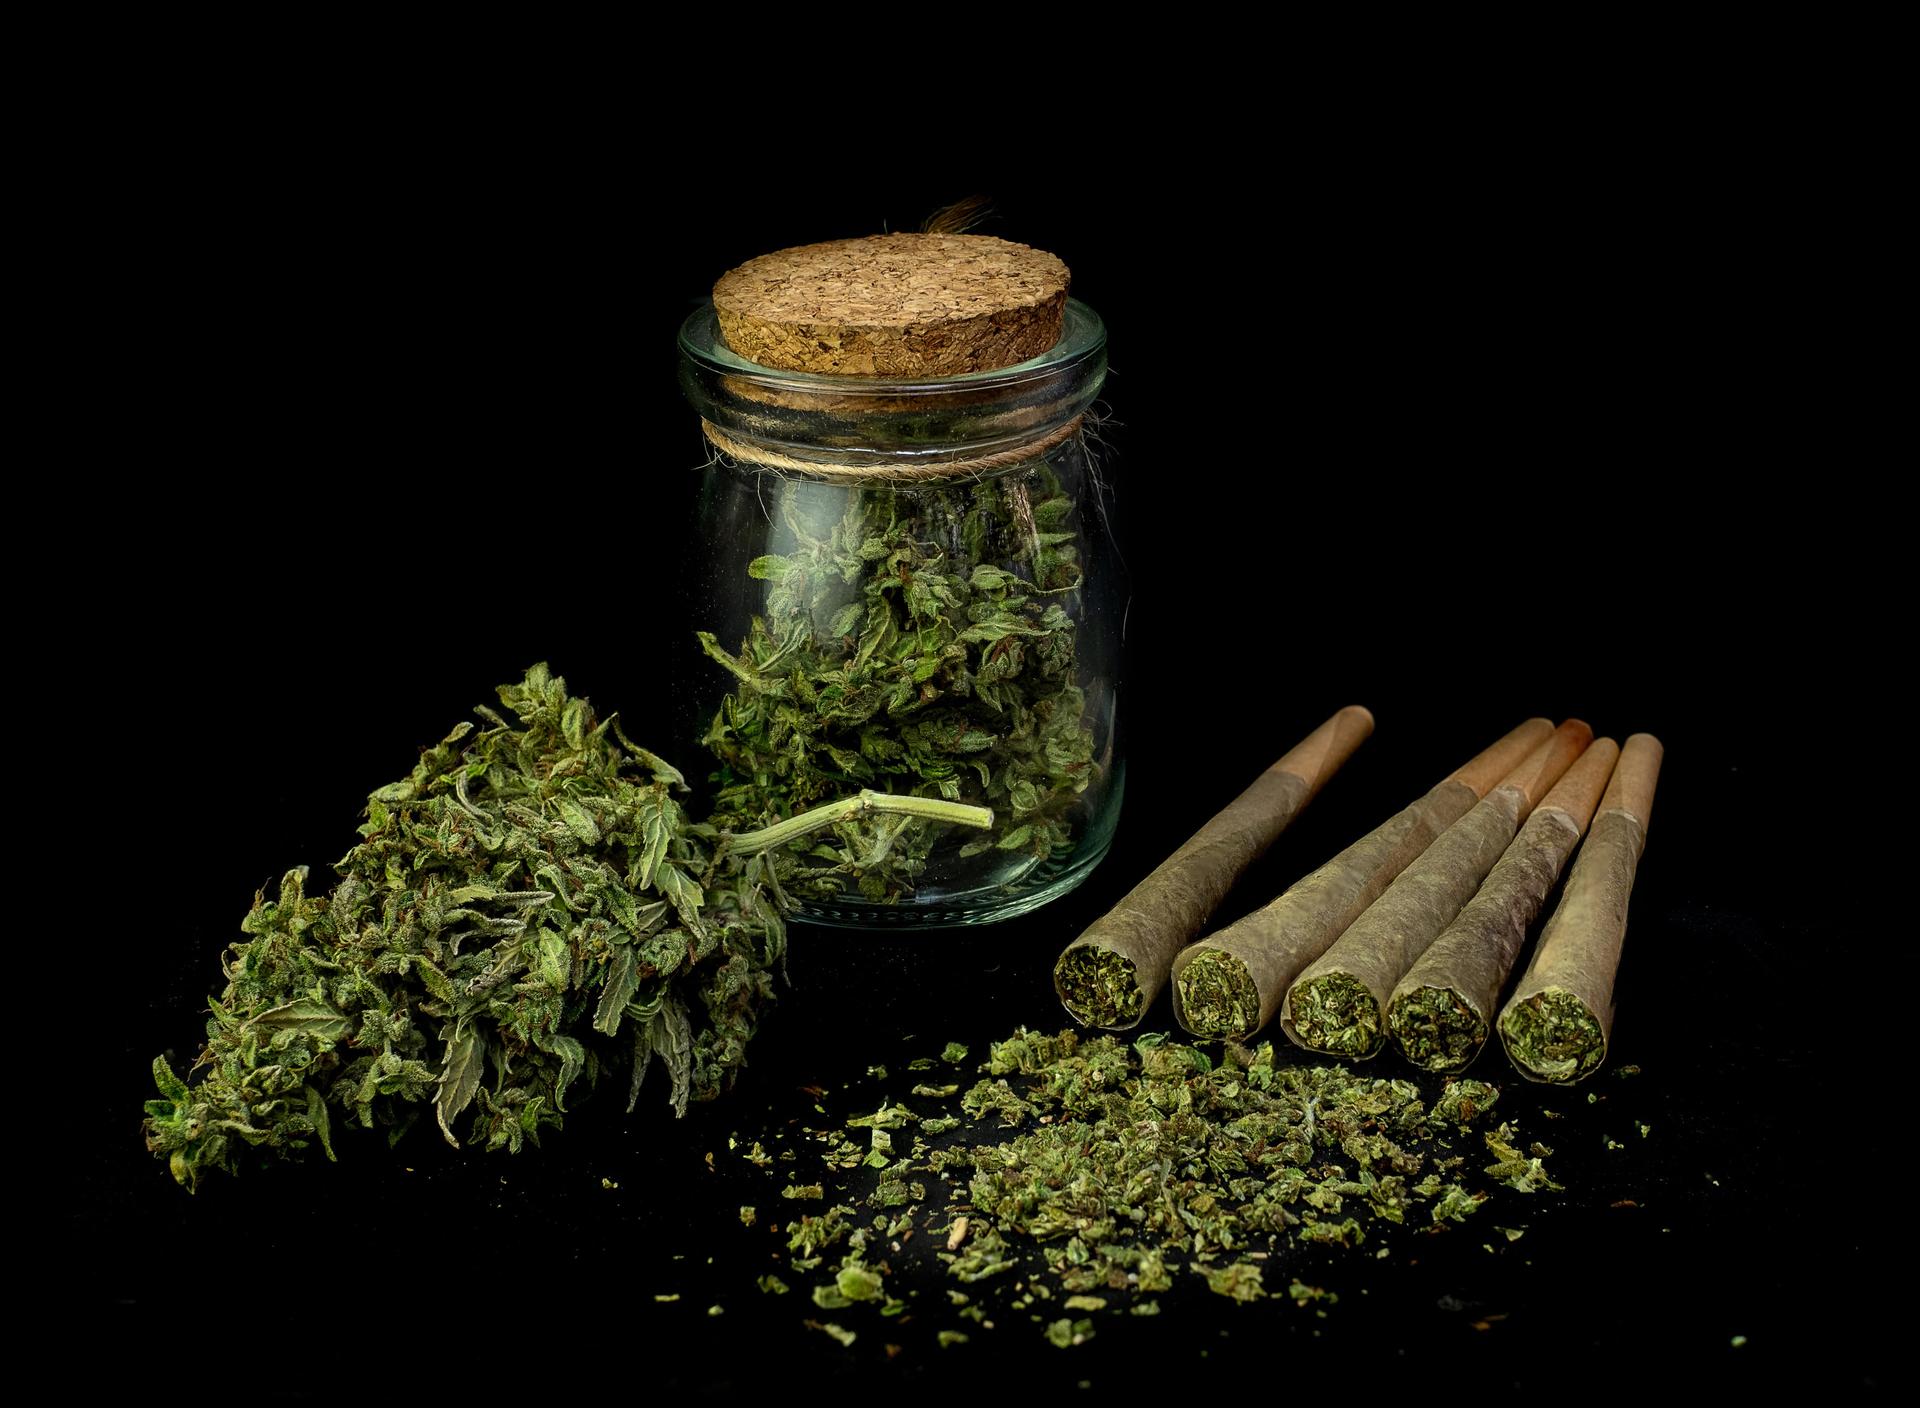 A Jar of Cannabis and Joints